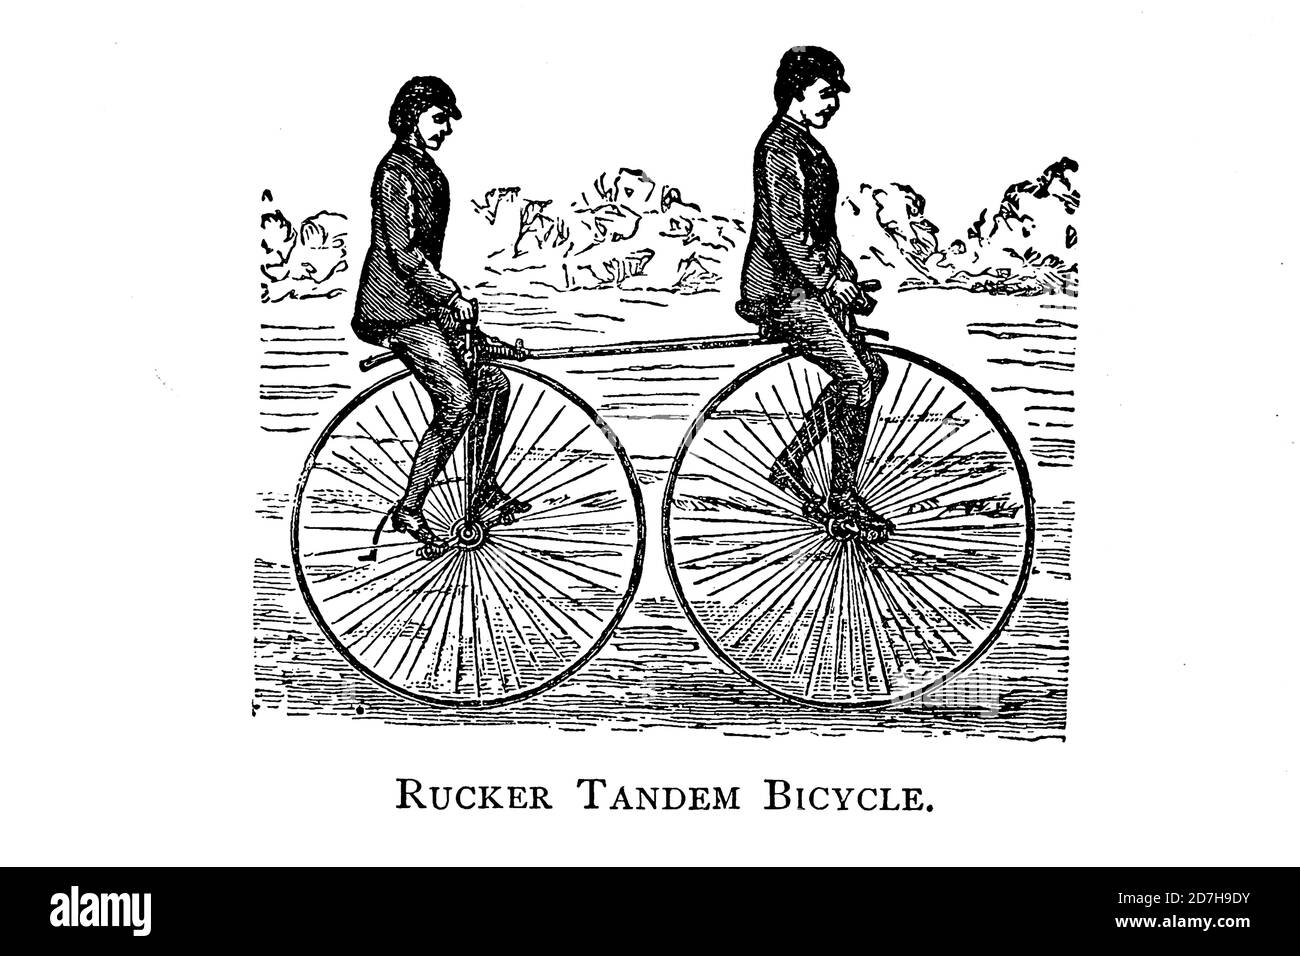 Two men ride a Rucker Tandem bicycle From Wheels and Wheeling; An indispensable handbook for cyclists, with over two hundred illustrations by Porter, Stock Photo